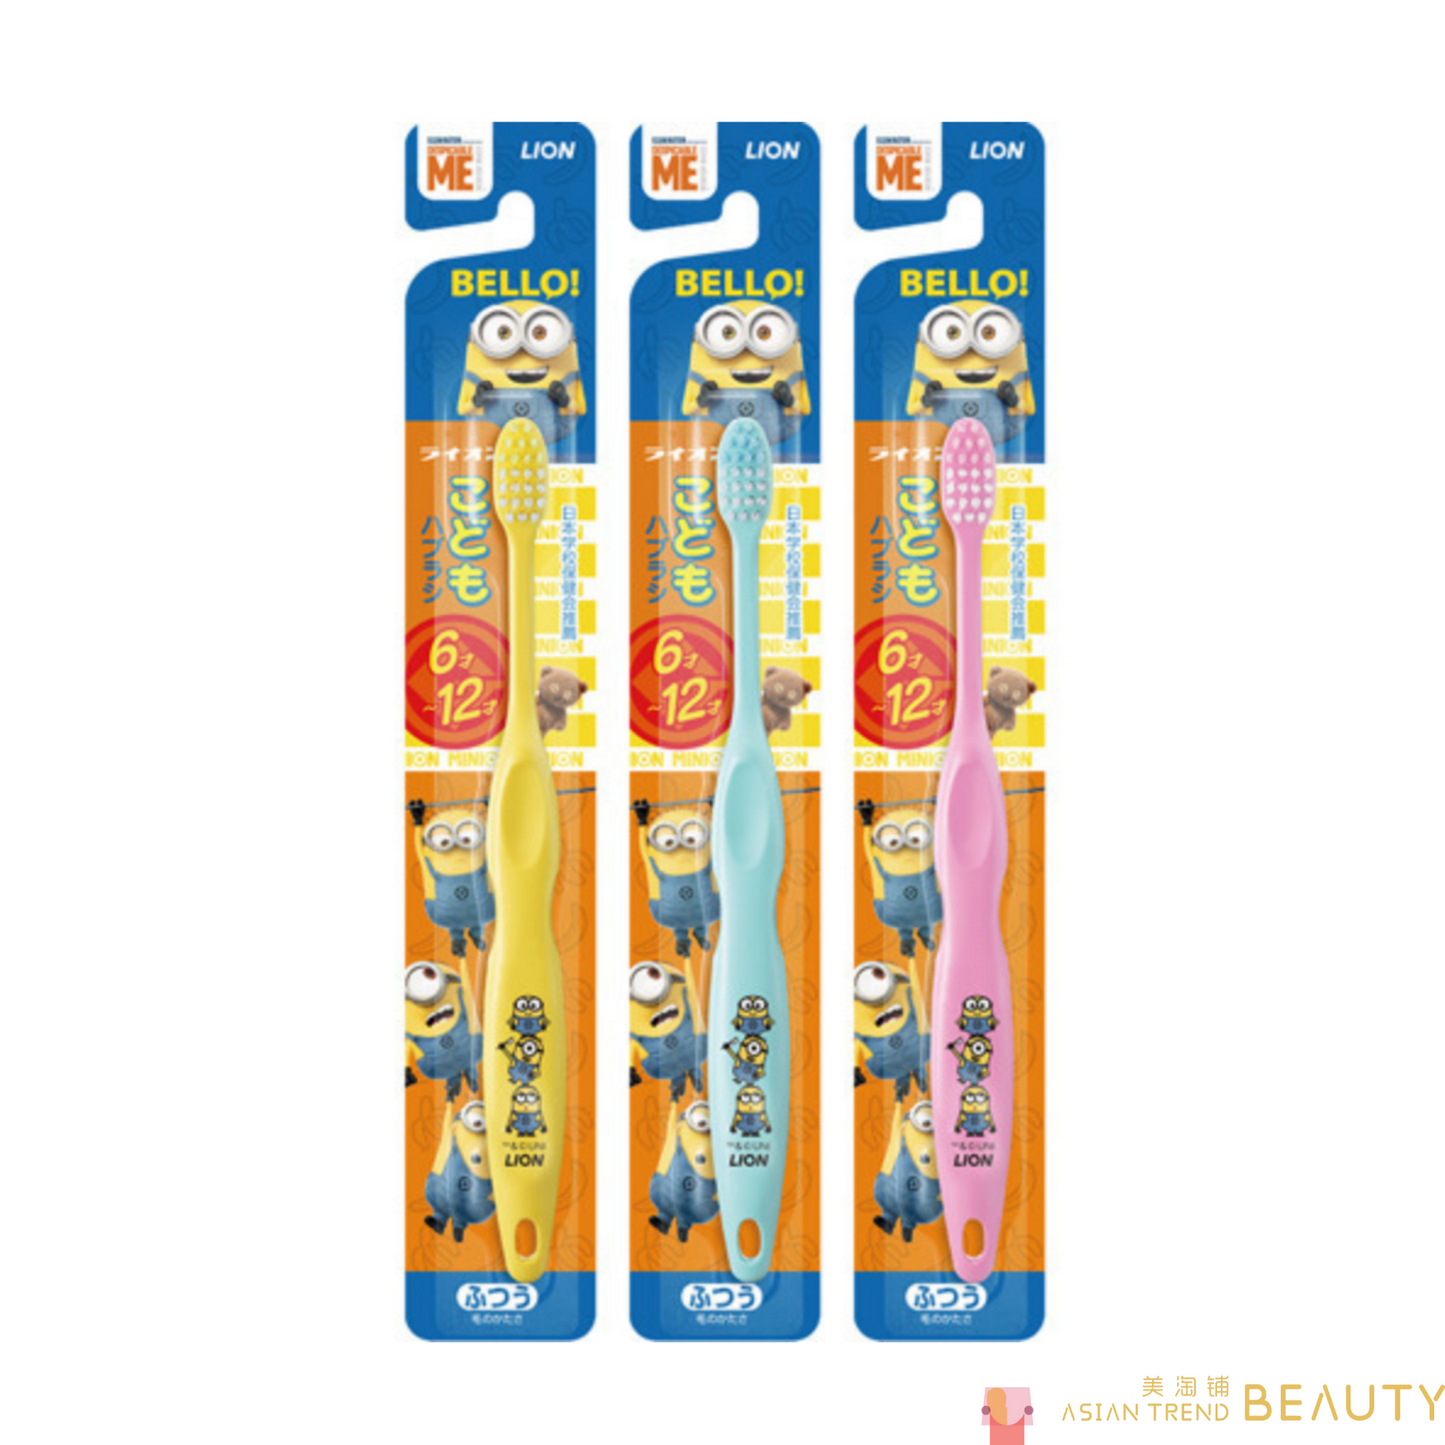 Lion children's toothbrush 6-12 years old minion edition